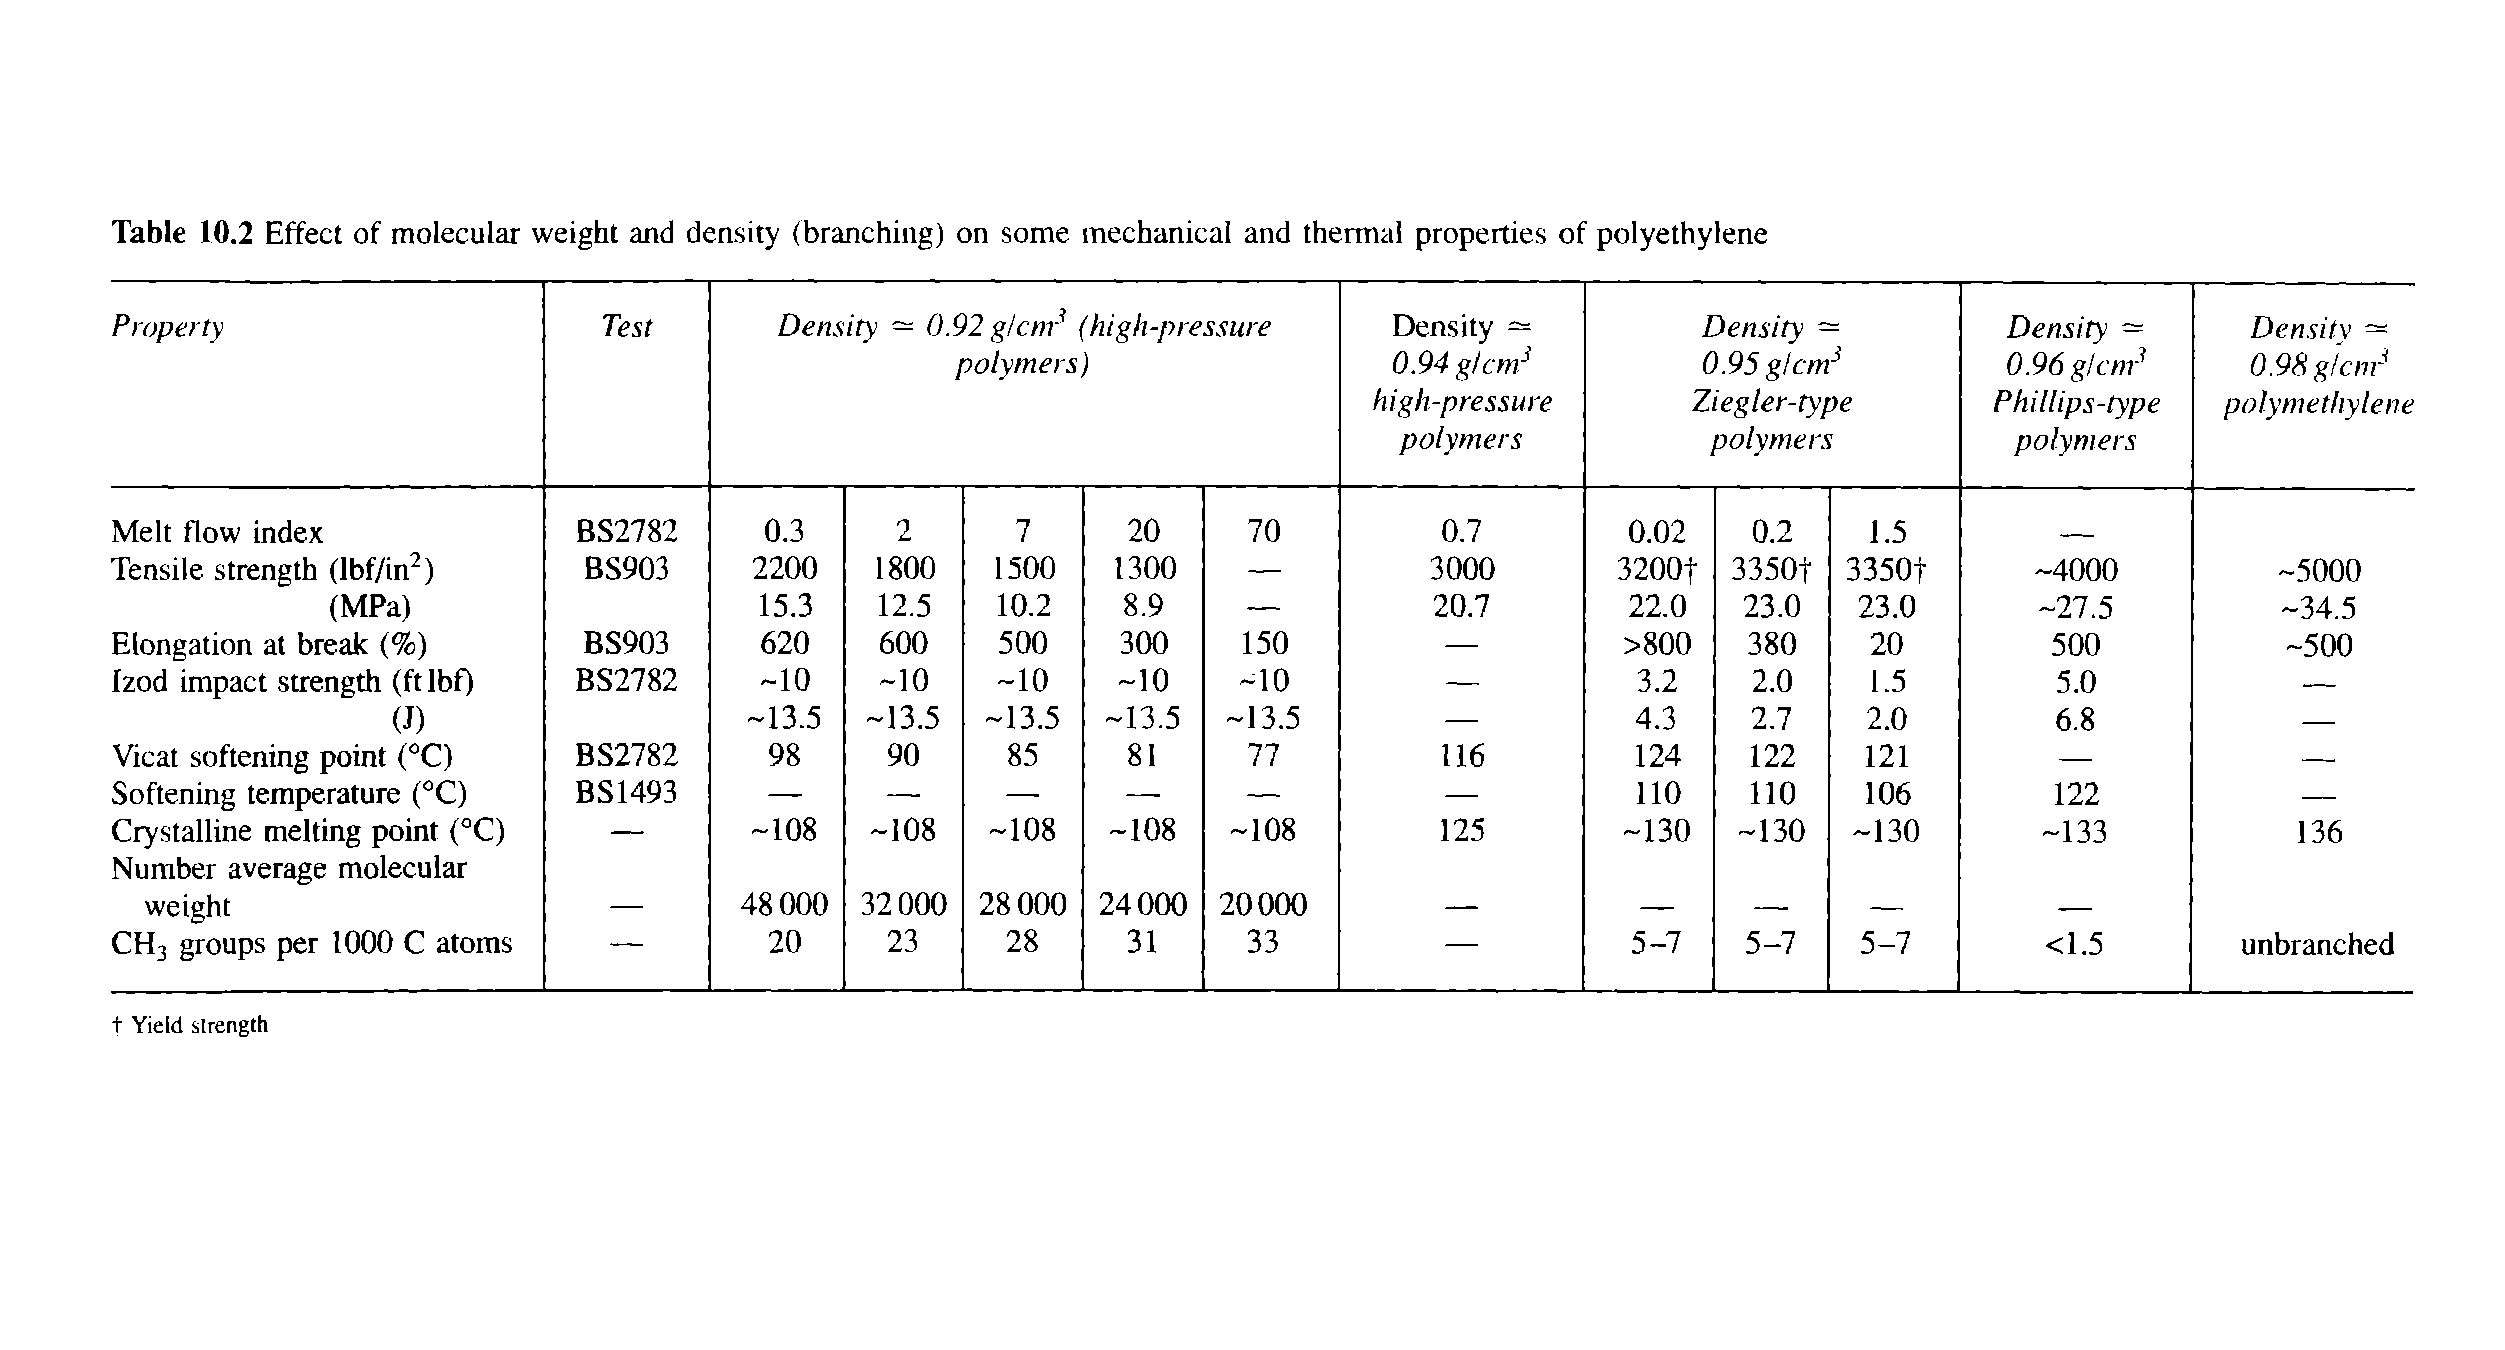 Table 10.2 Effect of molecular weight and density (branching) on some mechanical and thermal properties of polyethylene...